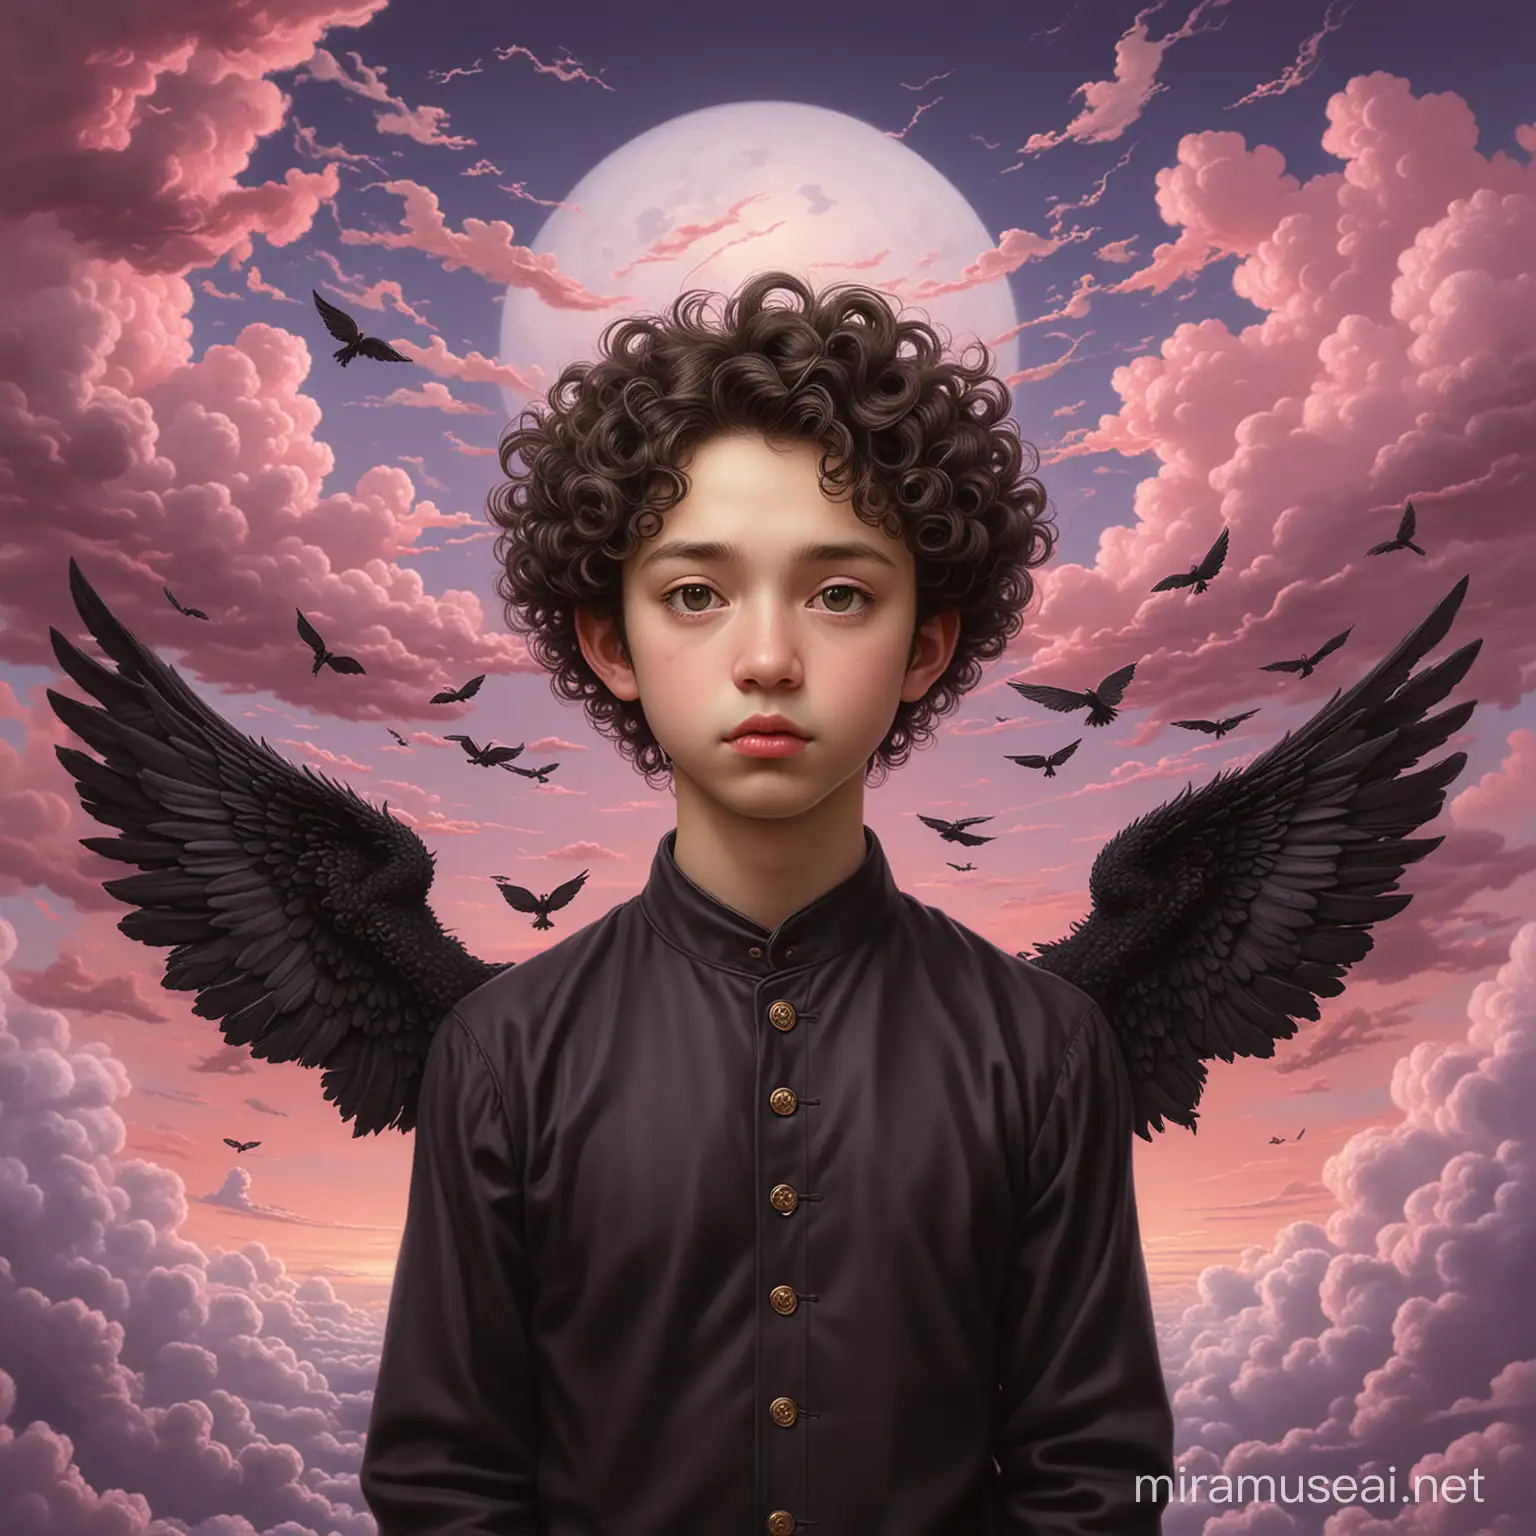 Young man, black clothes, curly hair, black wings, purple sky background with black clouds, pink, highly detailed Mark Ryden, Mark Ryden style, Mark Ryden style, Yoshitomo Nara, Mark Ryden style, inspired by Mark  Ryden, Japanese Pop Surrealism by Mark Ryden, Japanese Pop Surrealism, Art by Jana Brick, by Jason Trauka, Low Pop Surrealism